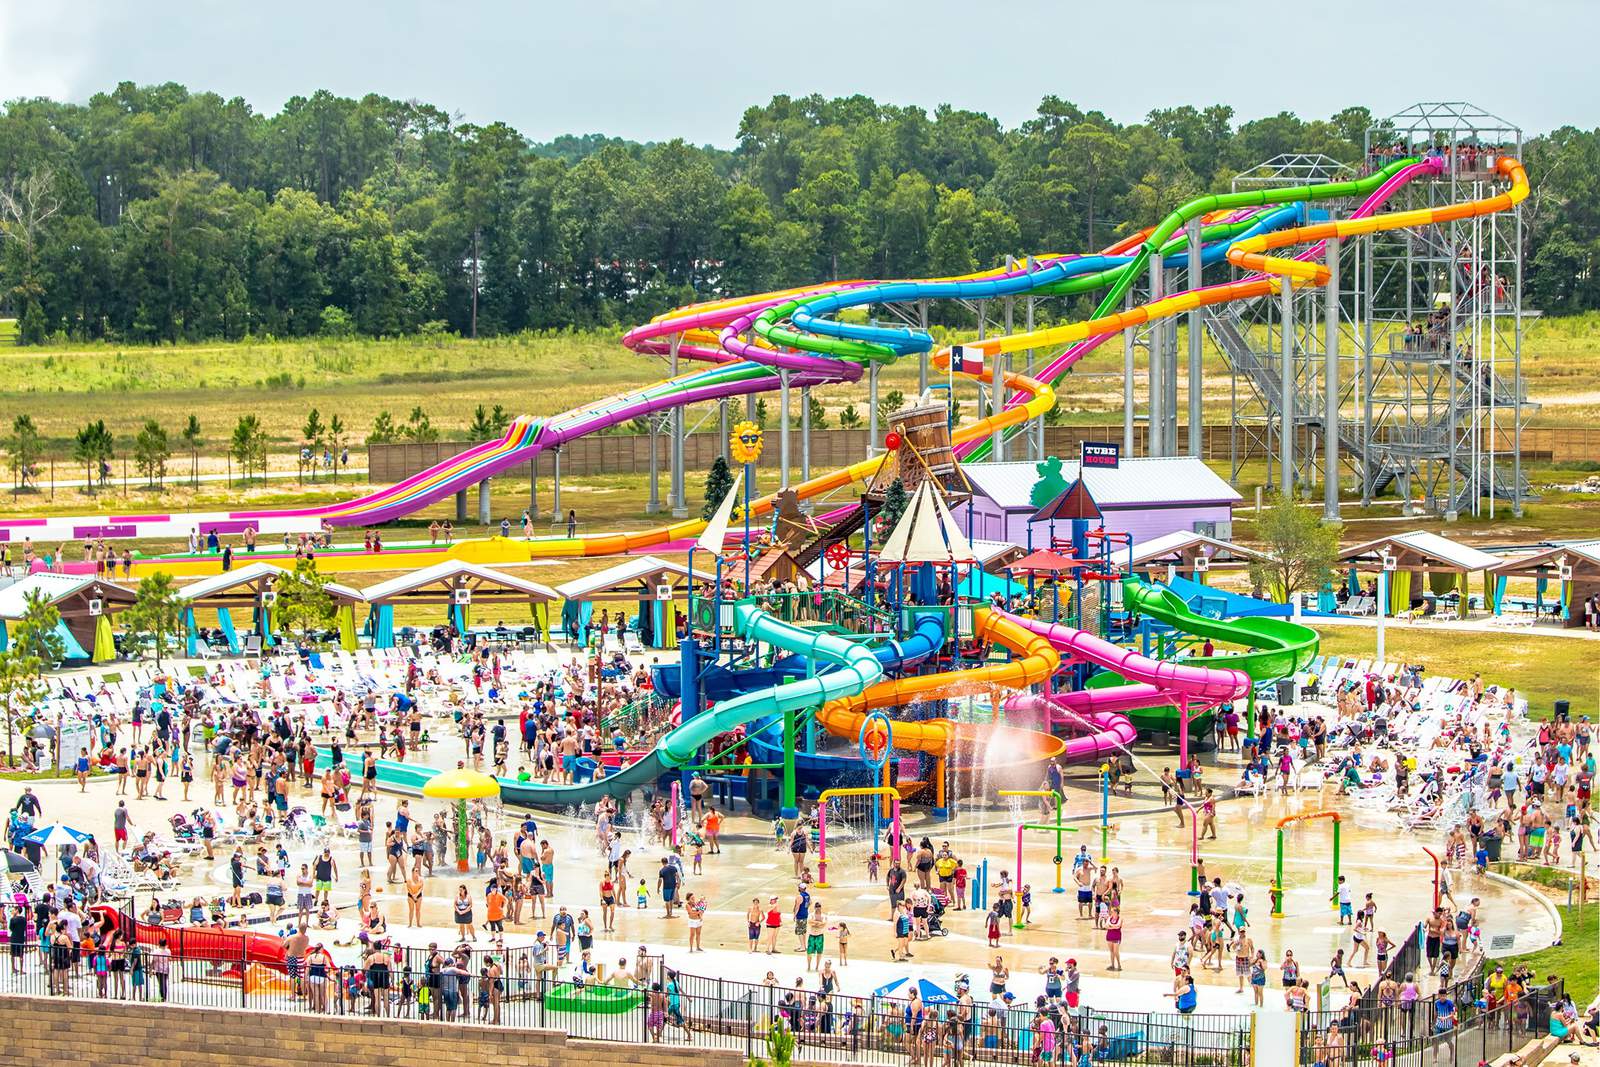 Big Rivers Waterpark announces new opening date, plans to hire 400, free passes for first responders and promises to follow CDC guidelines